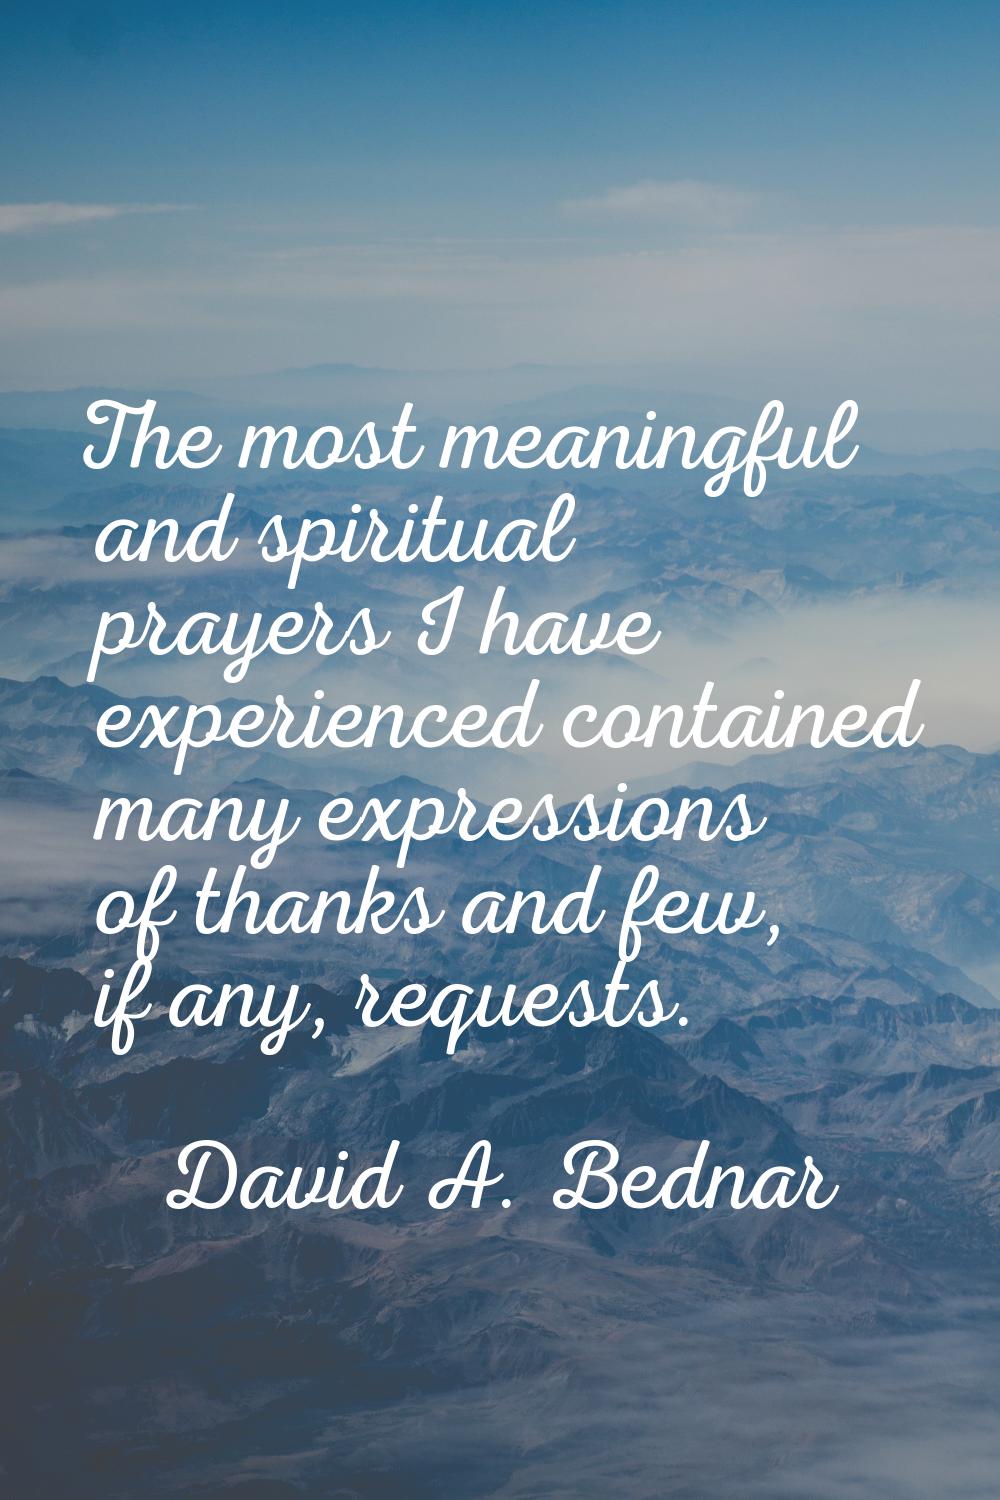 The most meaningful and spiritual prayers I have experienced contained many expressions of thanks a